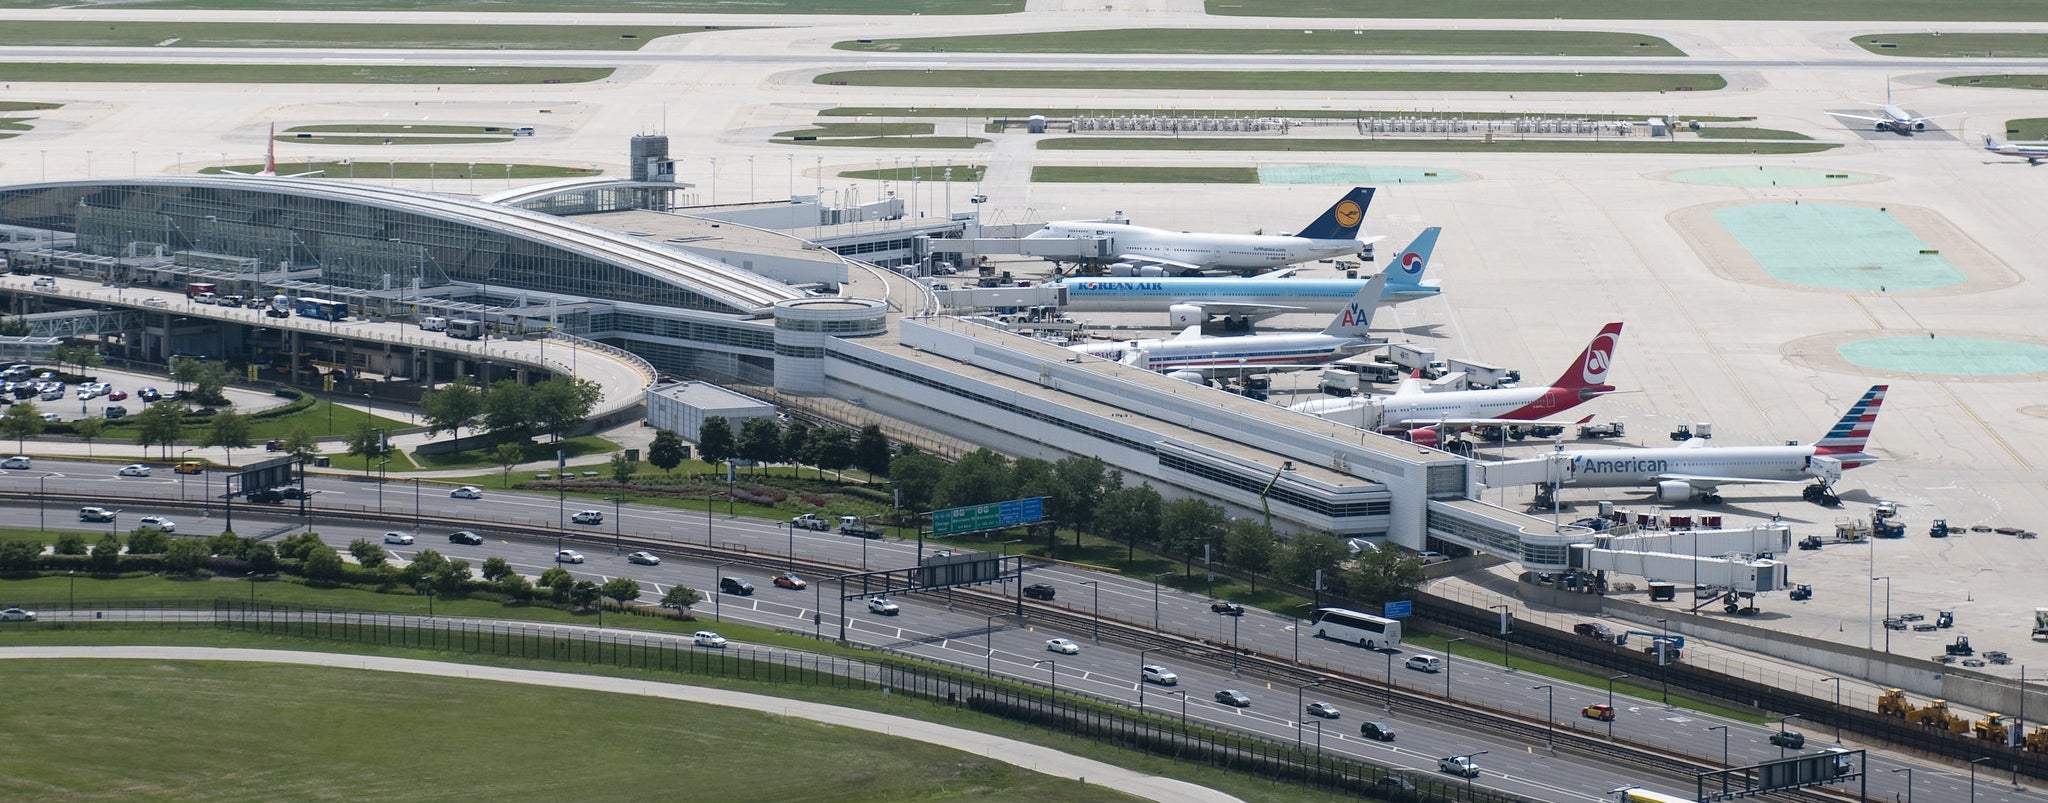 Chicago O'Hare International Airport [ORD] - Terminal Guide [2020]